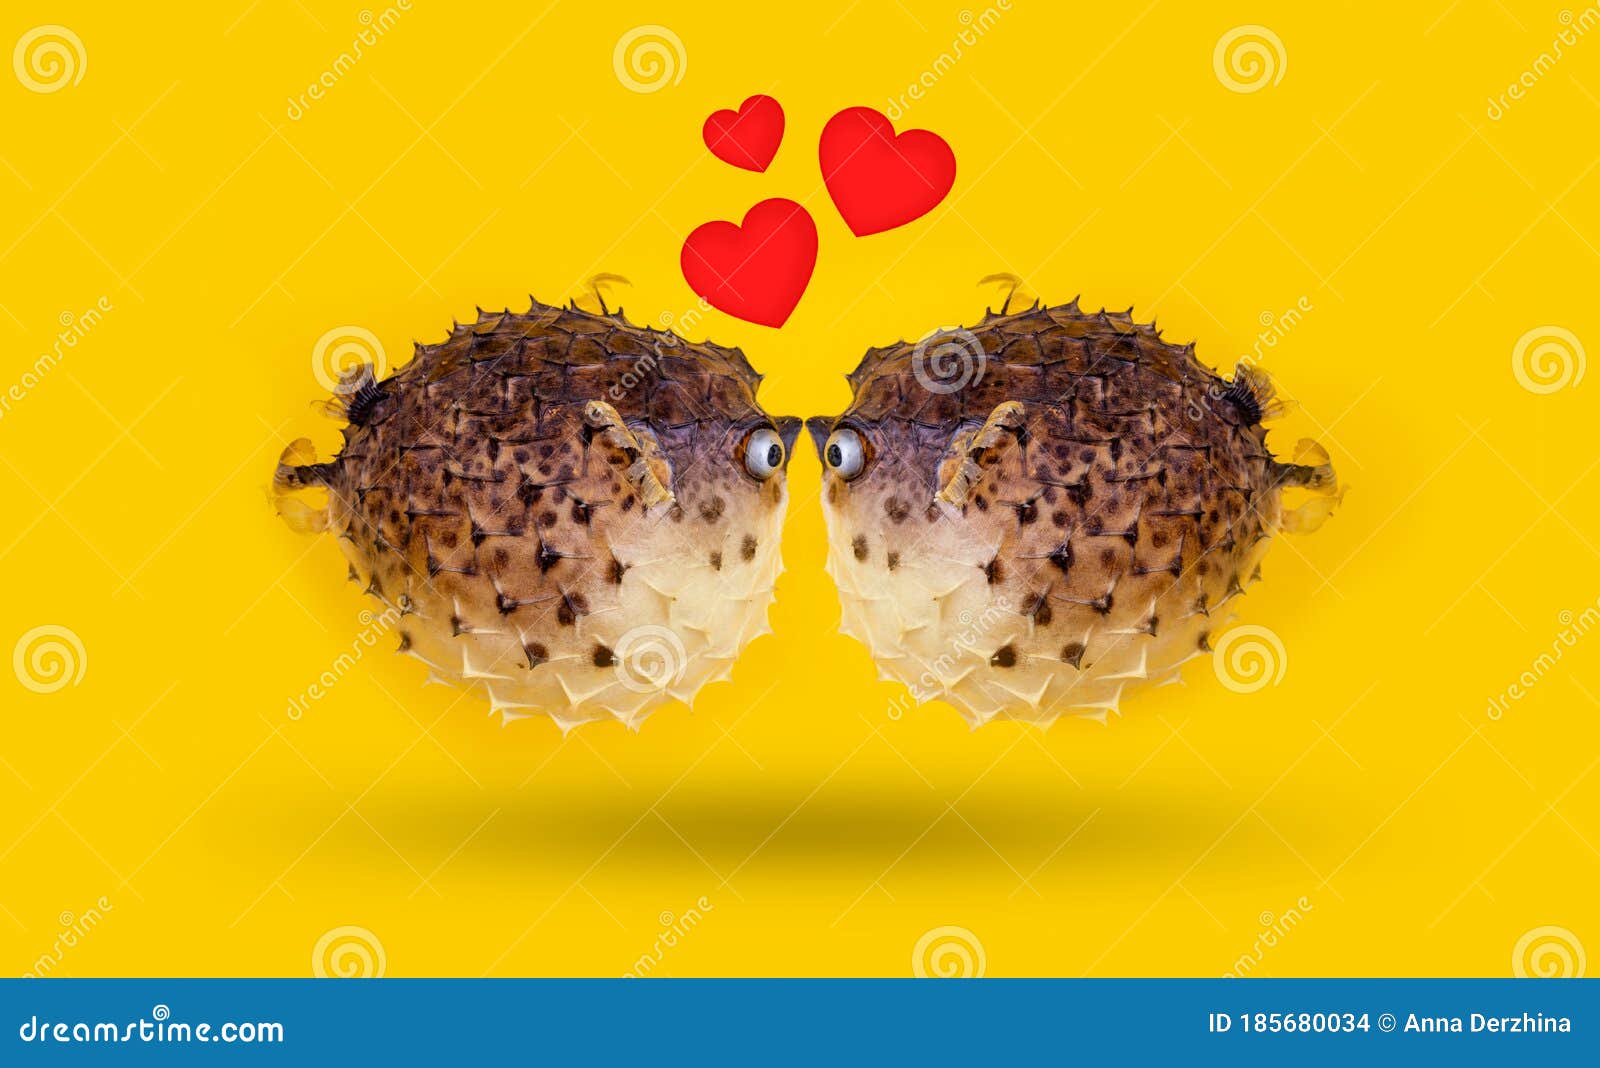 Fish Couple with Small Hearts from Kiss. Stock Photo - Image of funny,  greeting: 185680034